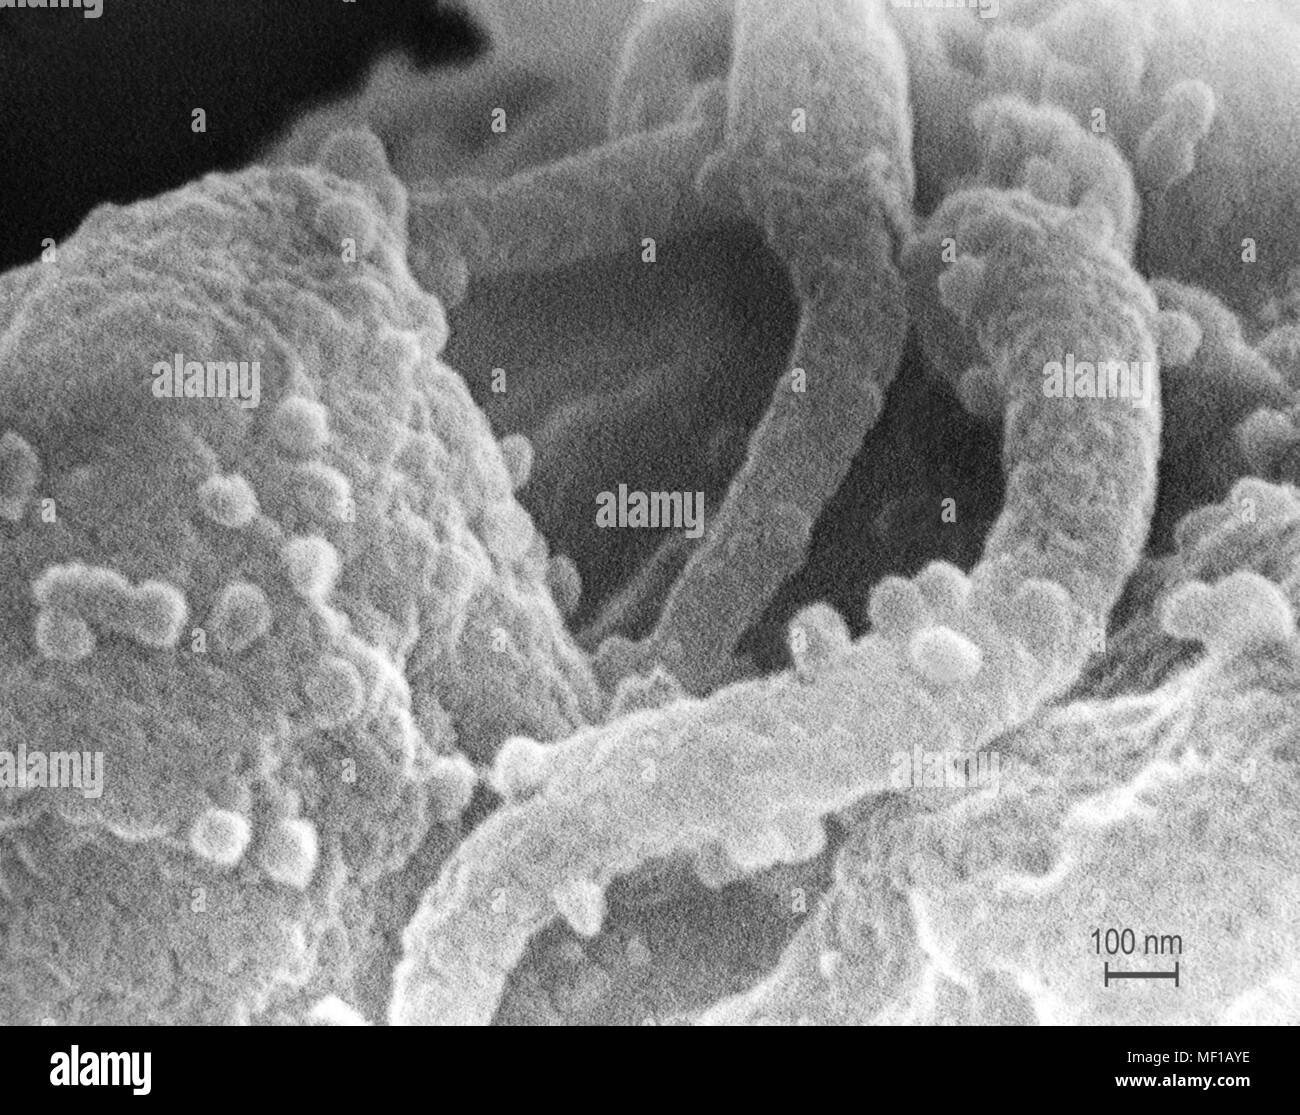 Presence of the human immunodeficiency virus (HIV-1) in a tissue sample, revealed in the highly magnified scanning electron microscopic (SEM) image, 1989. Image courtesy Centers for Disease Control (CDC) / C. Goldsmith, P. Feorino, E. L. Palmer, W. R. McManus. () Stock Photo